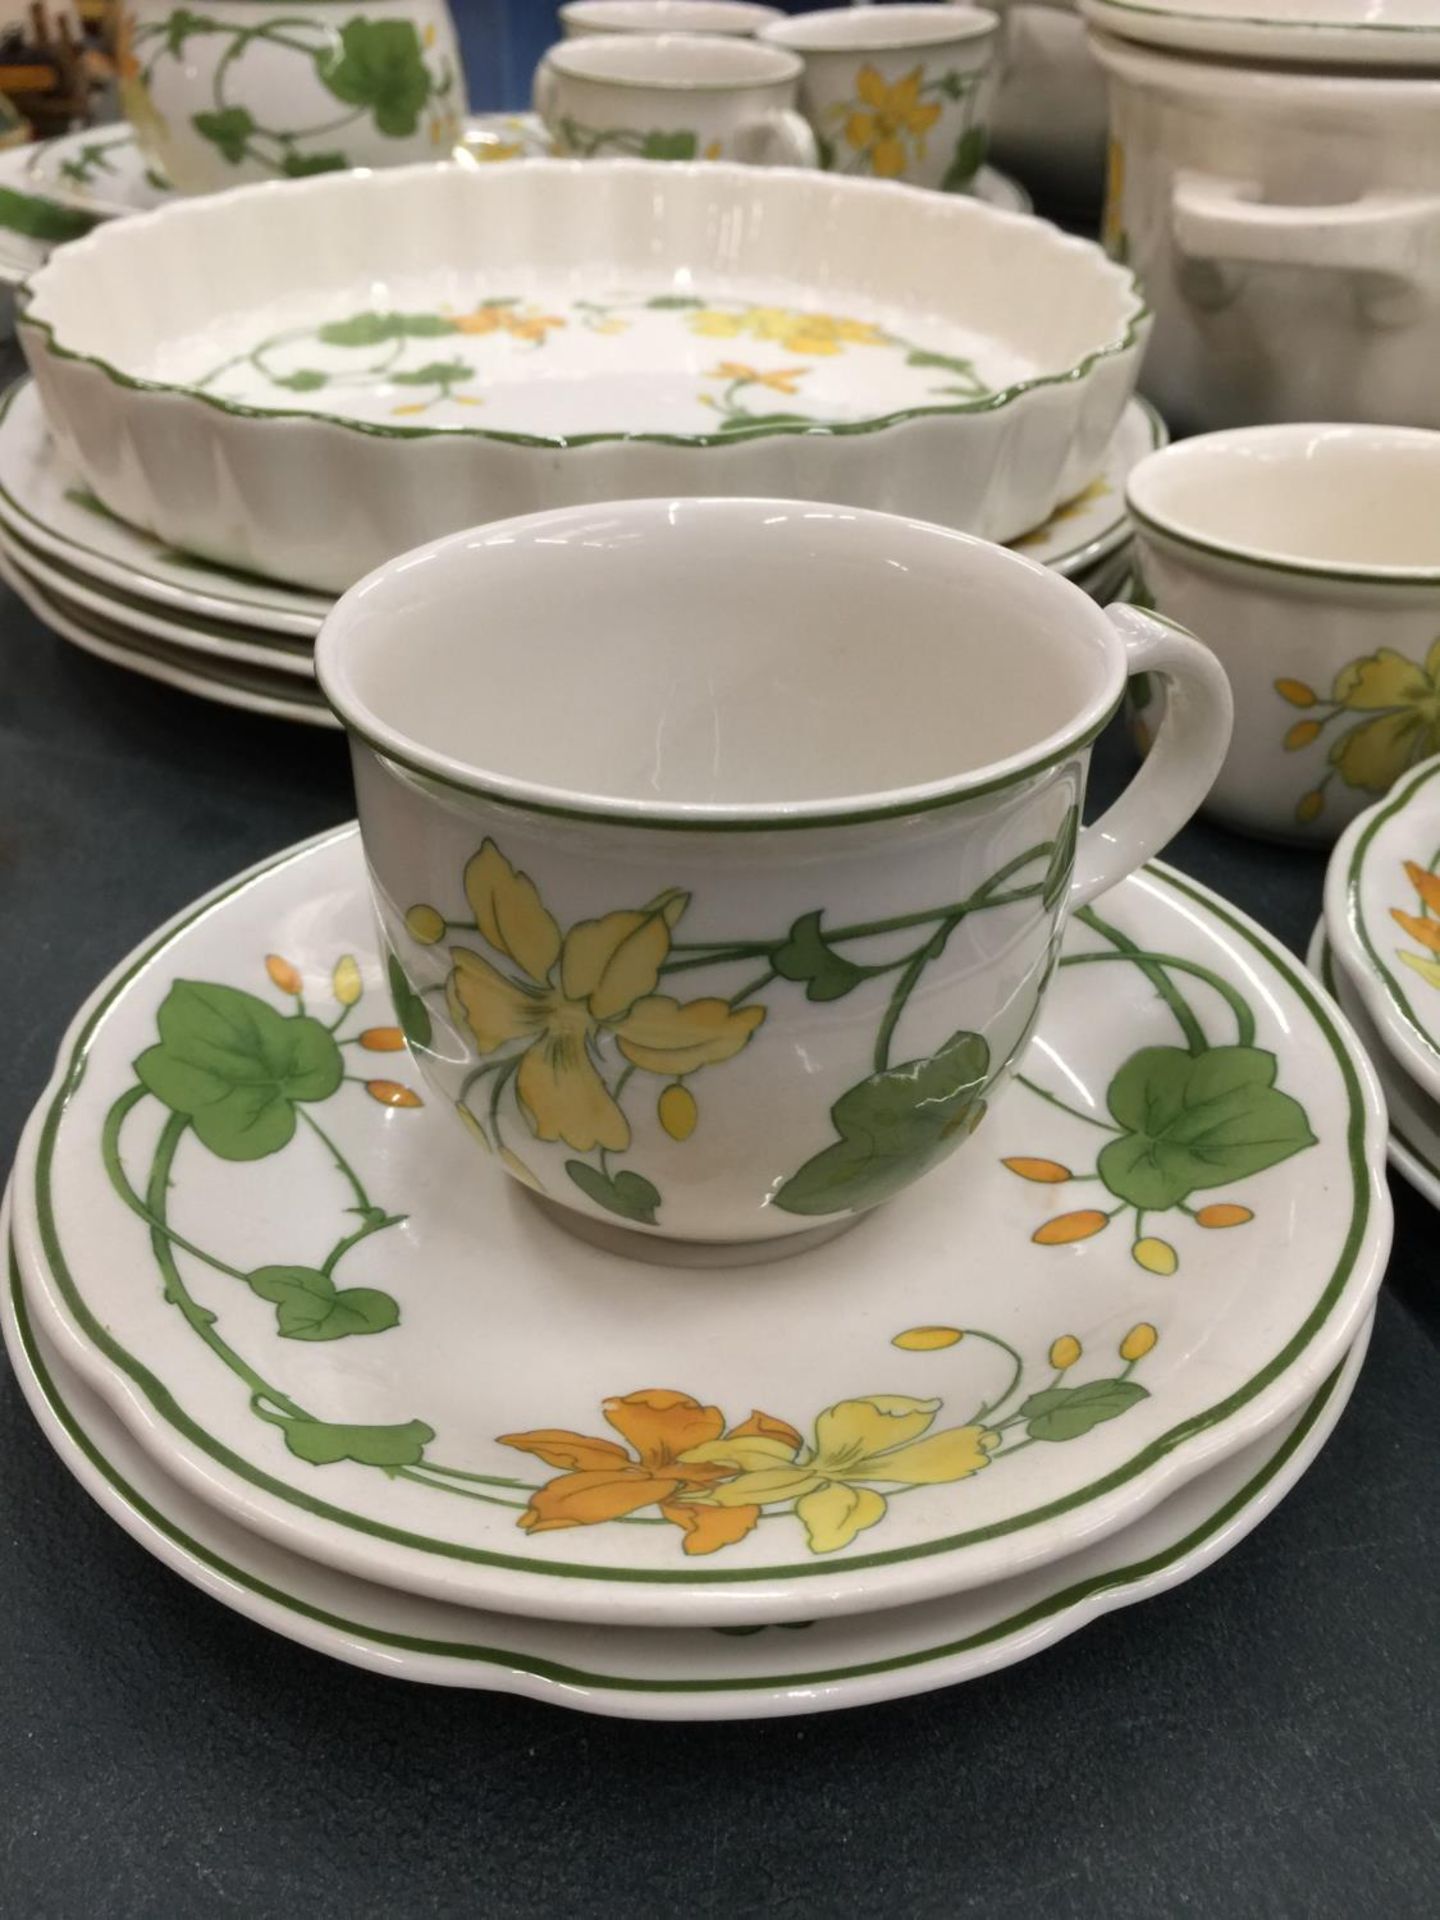 A LARGE QUANTITY OF VILLEROY AND BOCH 'GERANIUM' DINNERWARE TO INCLUDE PLATES, CUPS, SAUCERS, - Image 6 of 8